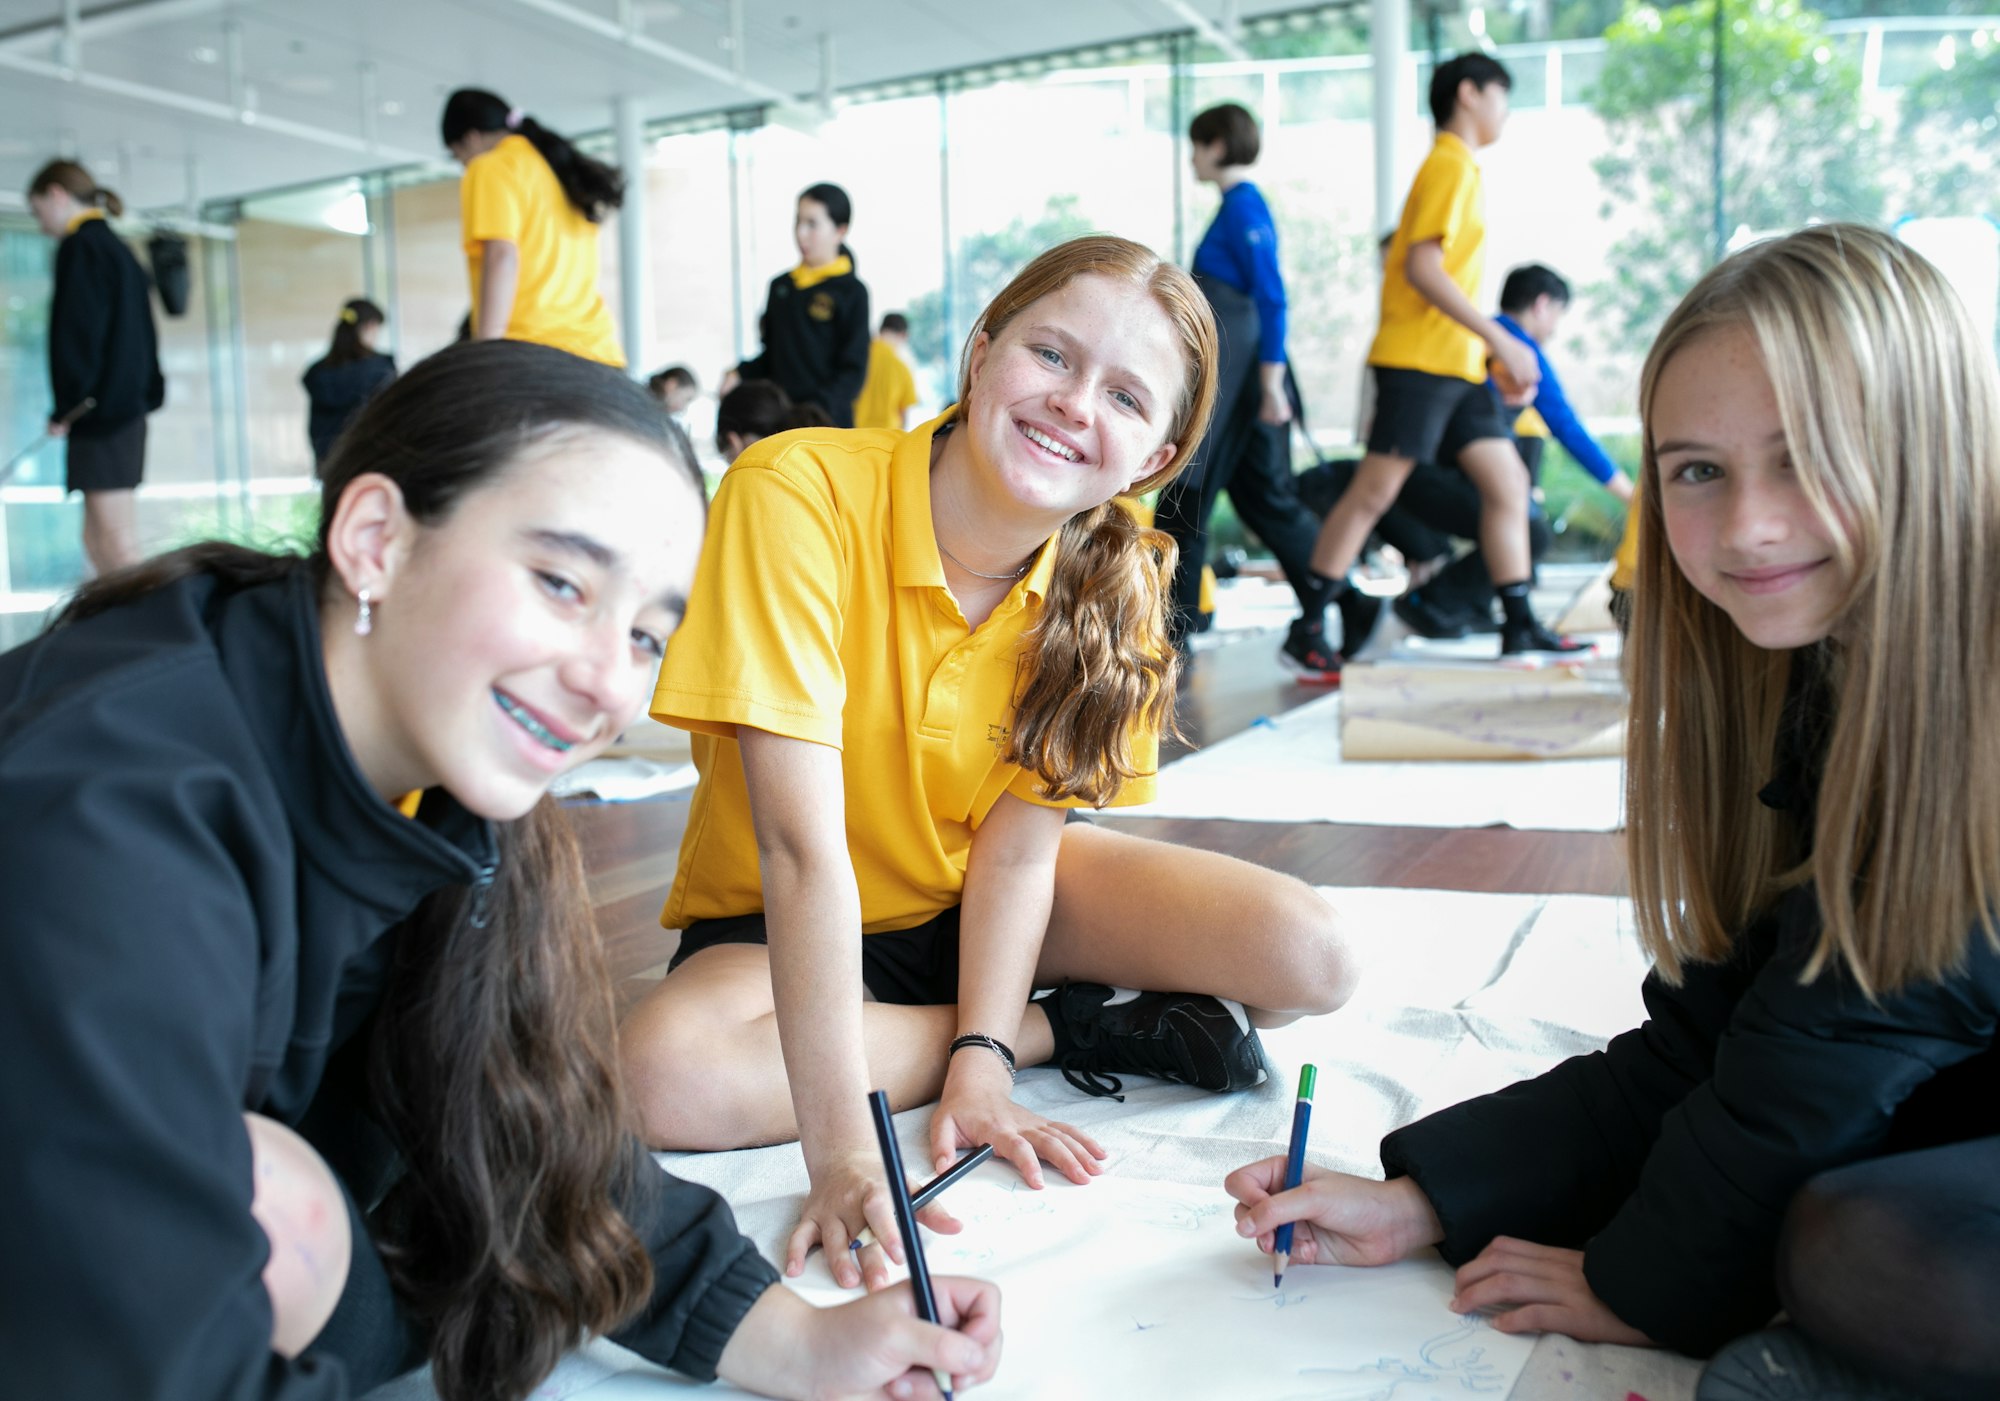 Students in Big Art Day program at the Art Gallery of New South Wales.